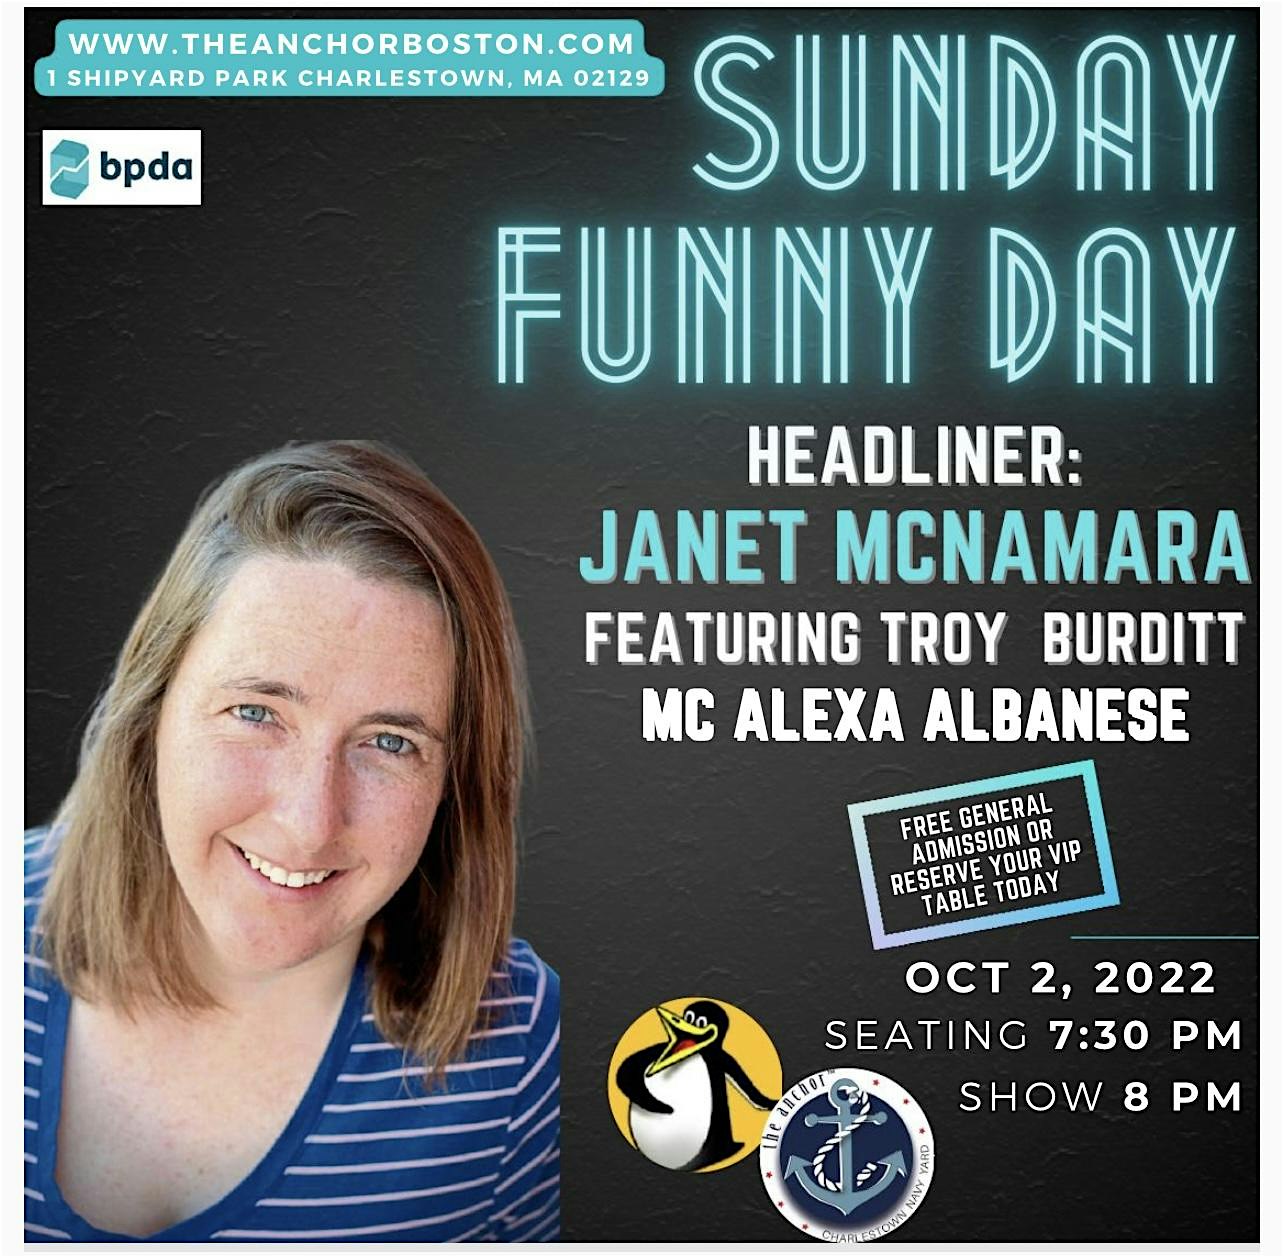 Stand-up at The Anchor, Charlestown: Sunday Funny Day